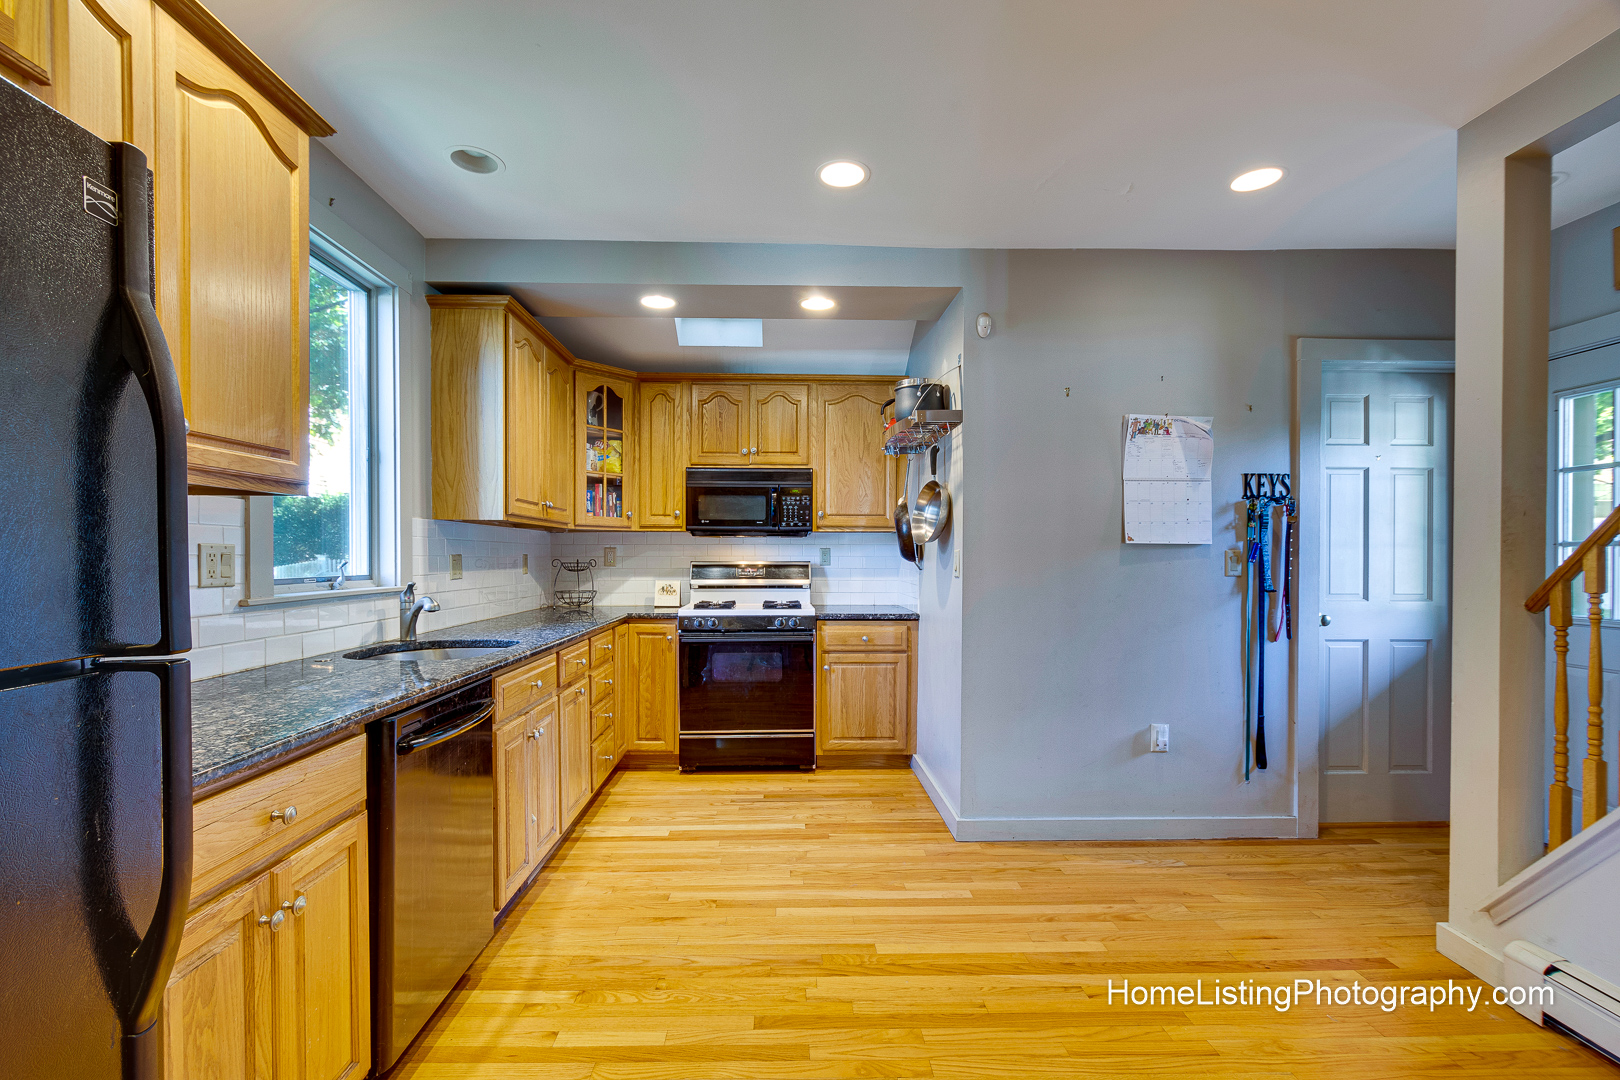 Thomas Adach - Woburn, MA professional real estate photographer - 508-655-2225 Home Listing Photography